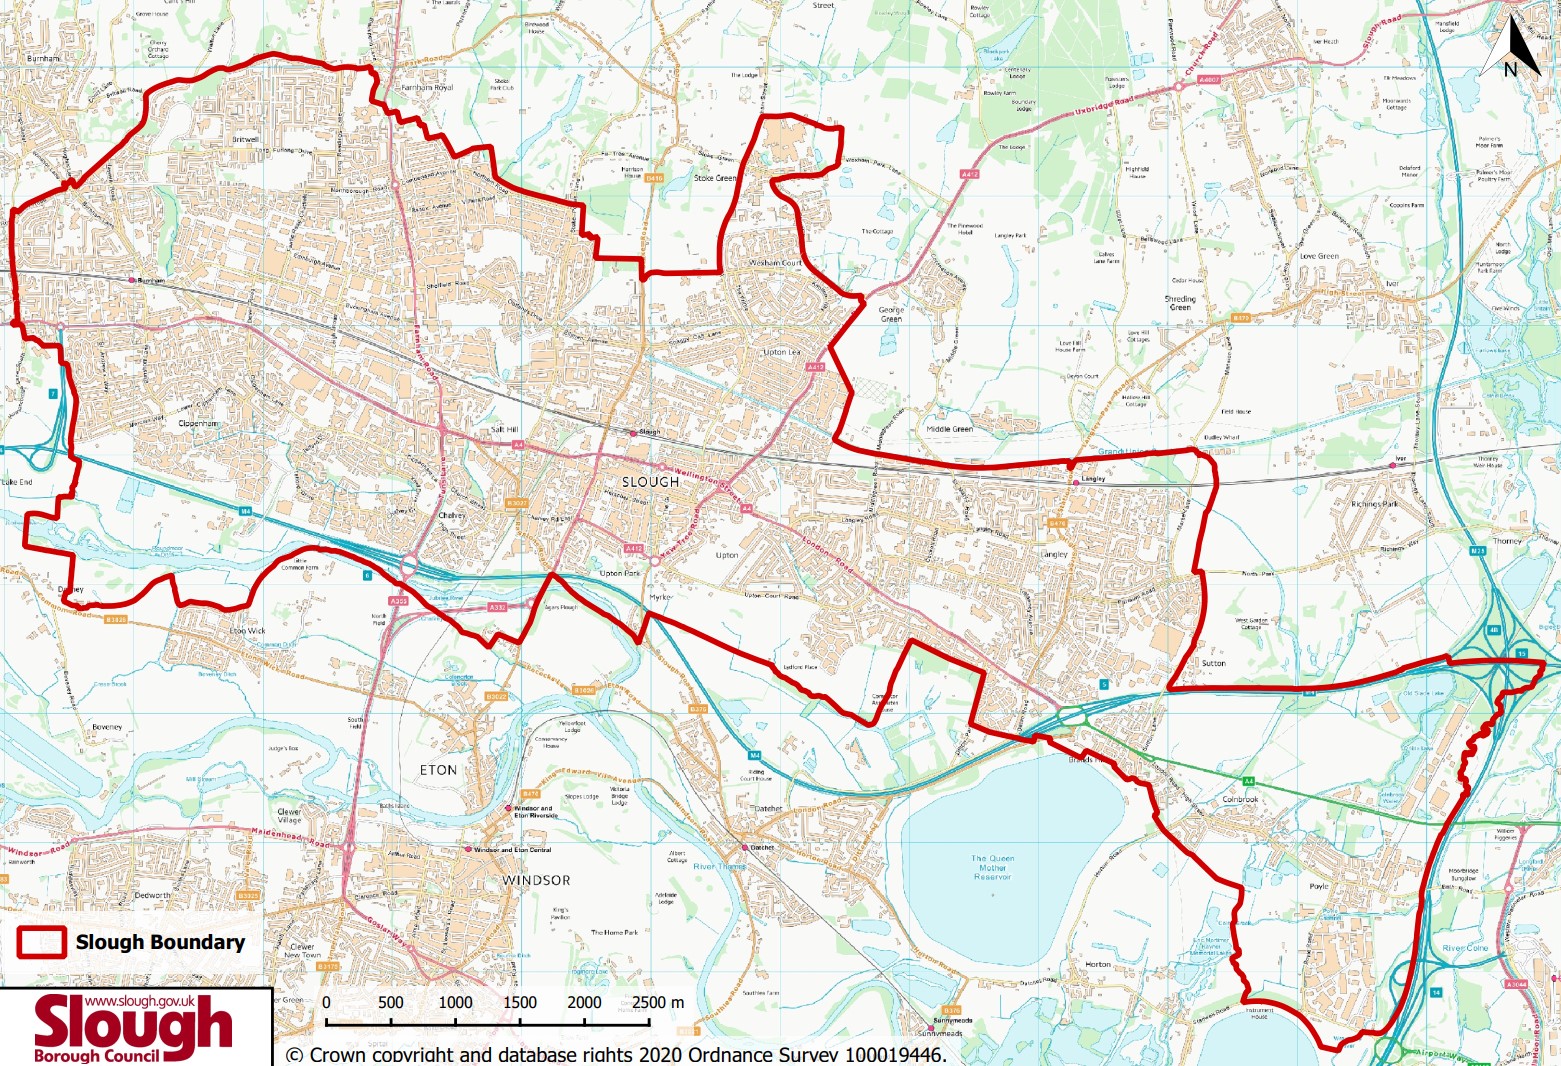 PSPO map of Slough